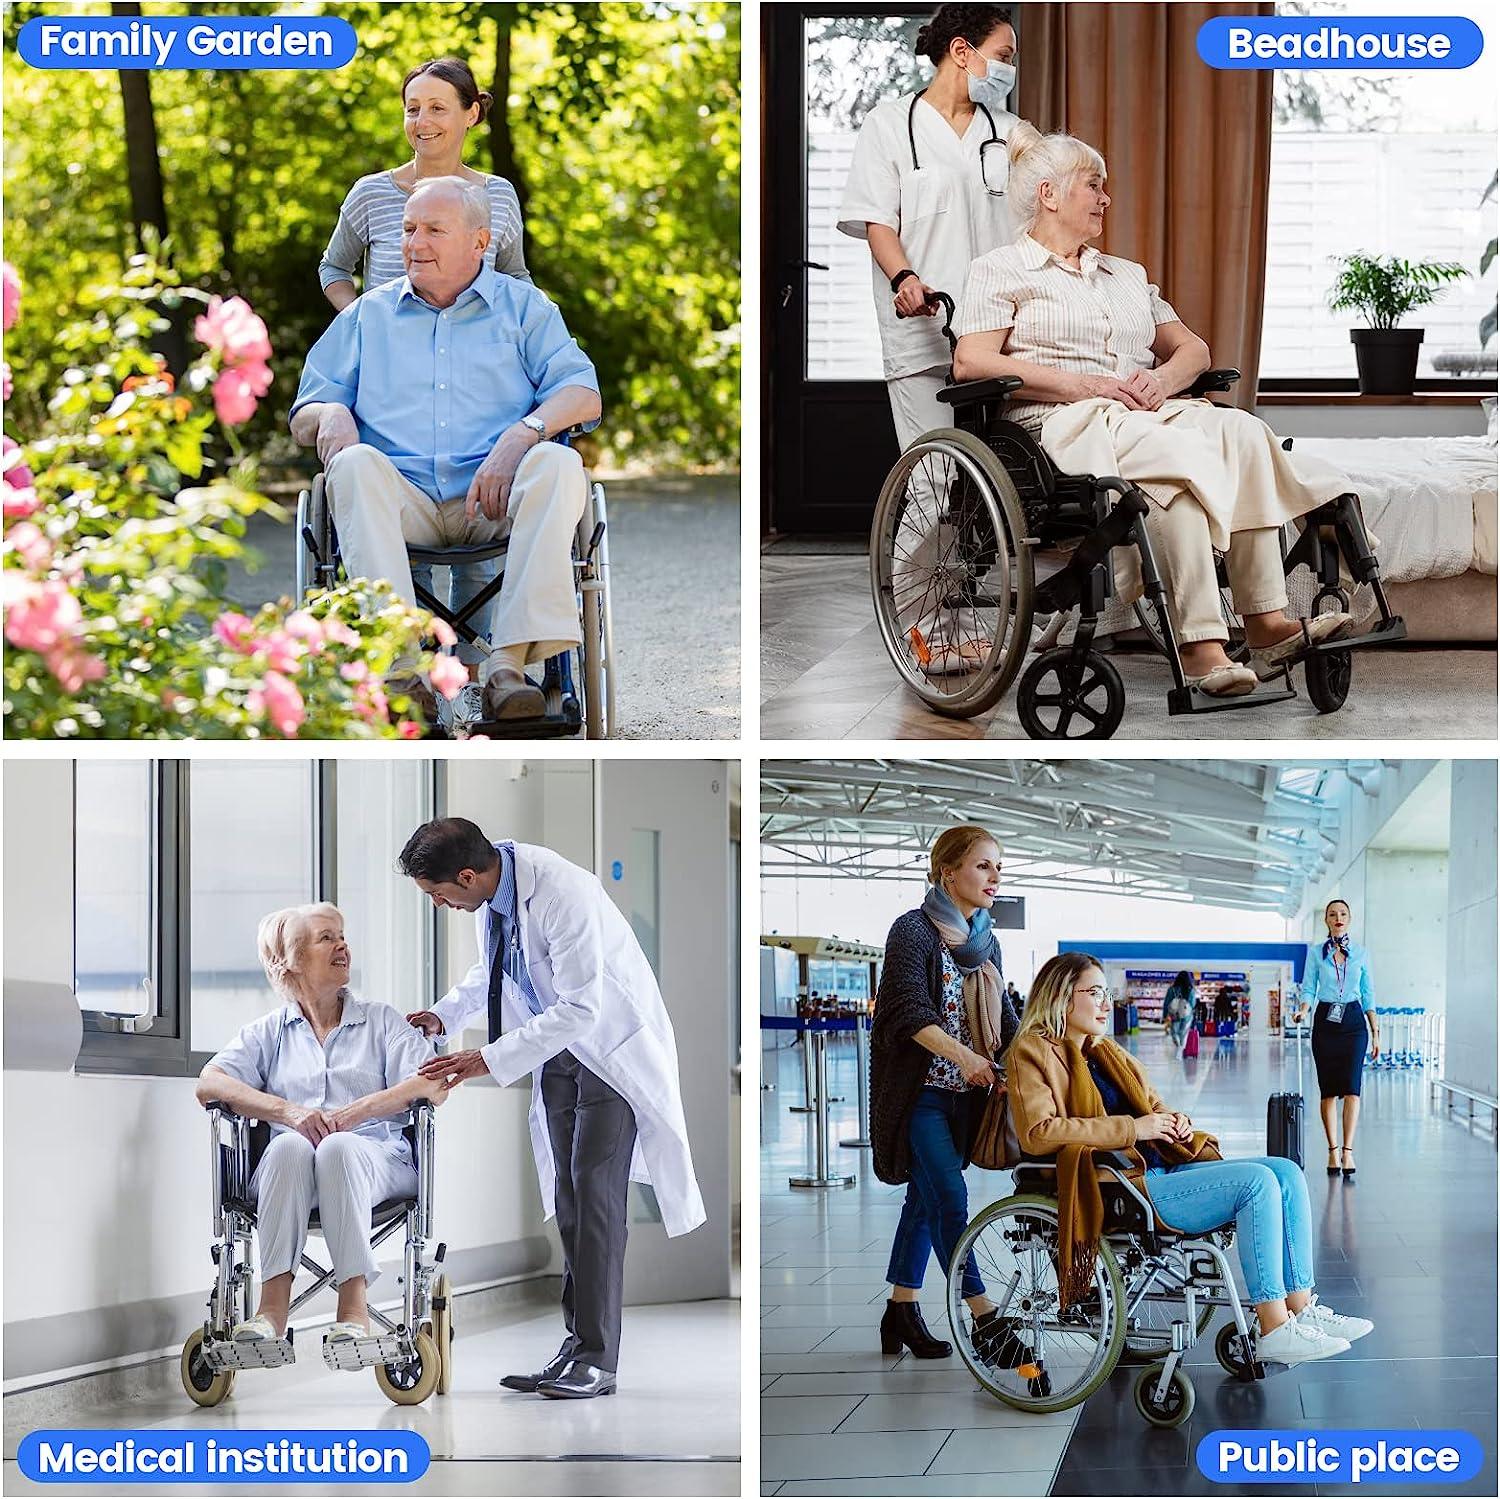 Chair Alarm For Elderly Dementia Patients, Briidea Chair Alarms and Fall Prevention for Elderly, Dual Protection of Lighting and Sound, Easy to Clean, Protecting The Safety of Wheelchair Users - briidea